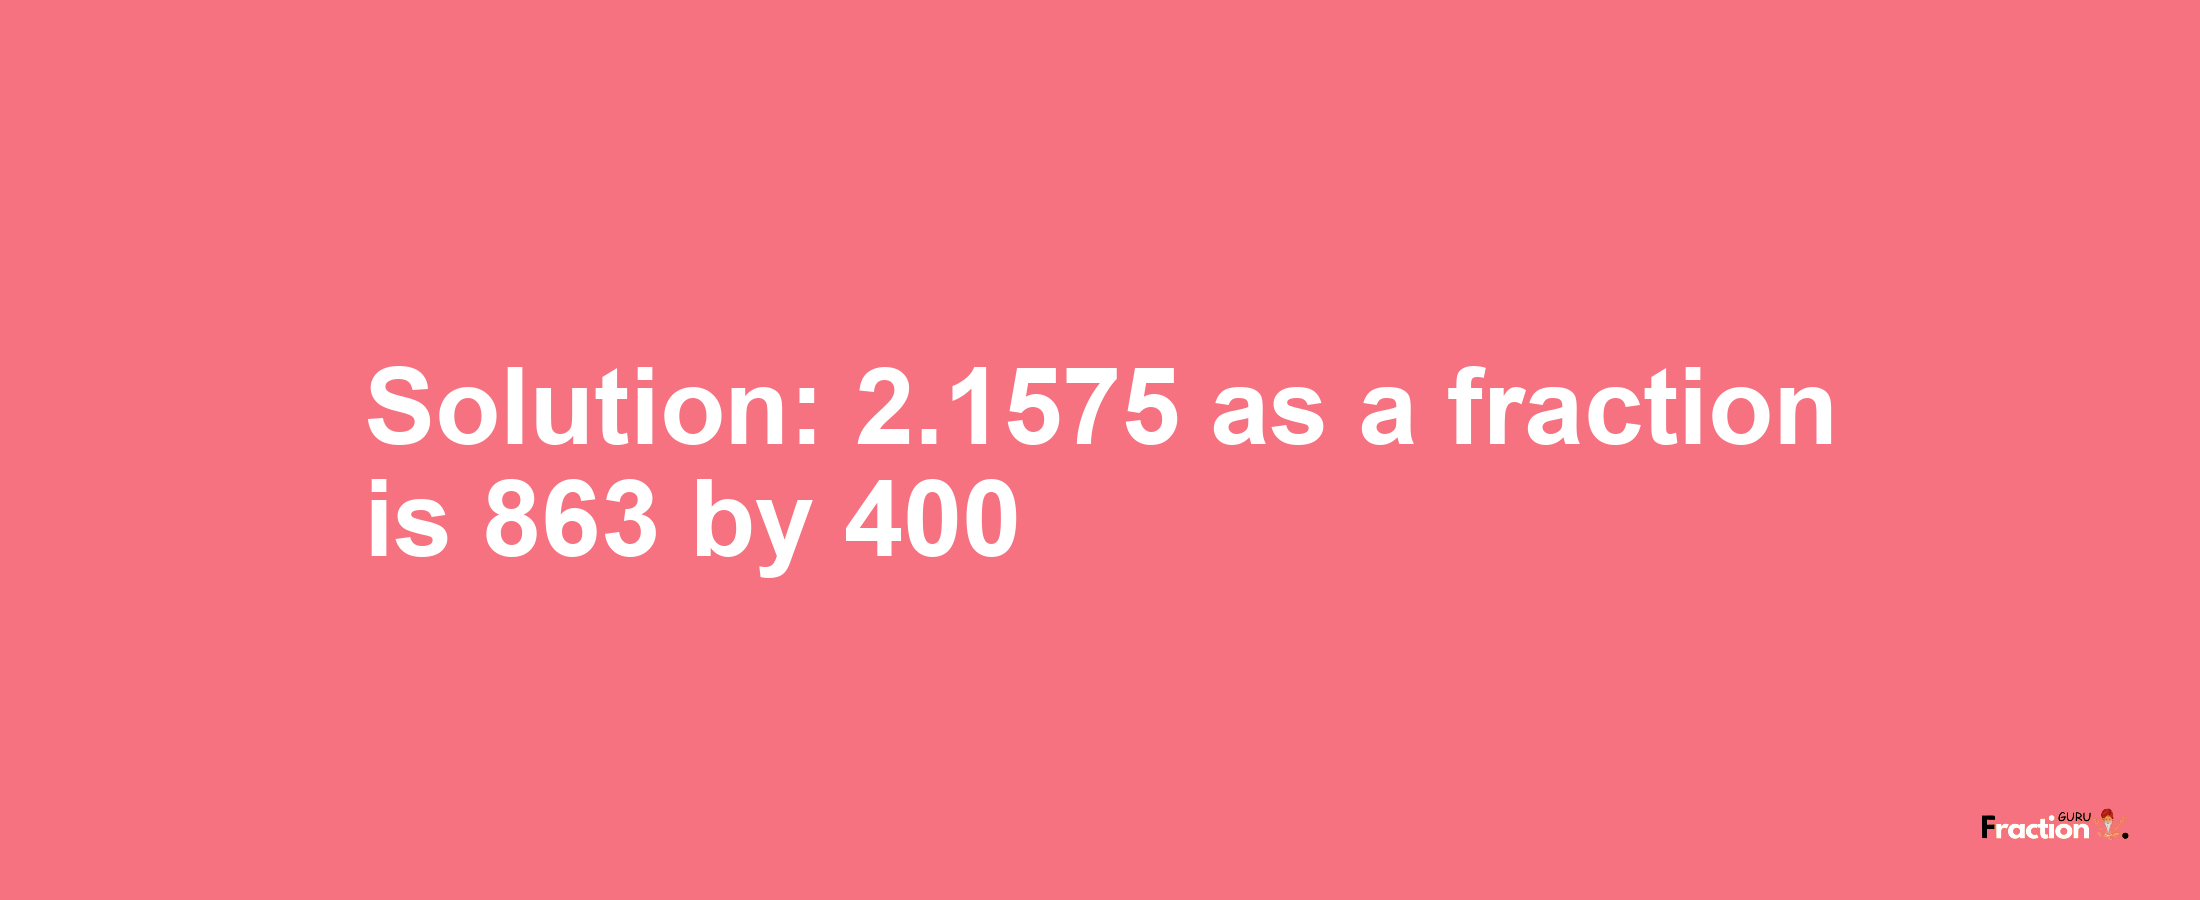 Solution:2.1575 as a fraction is 863/400